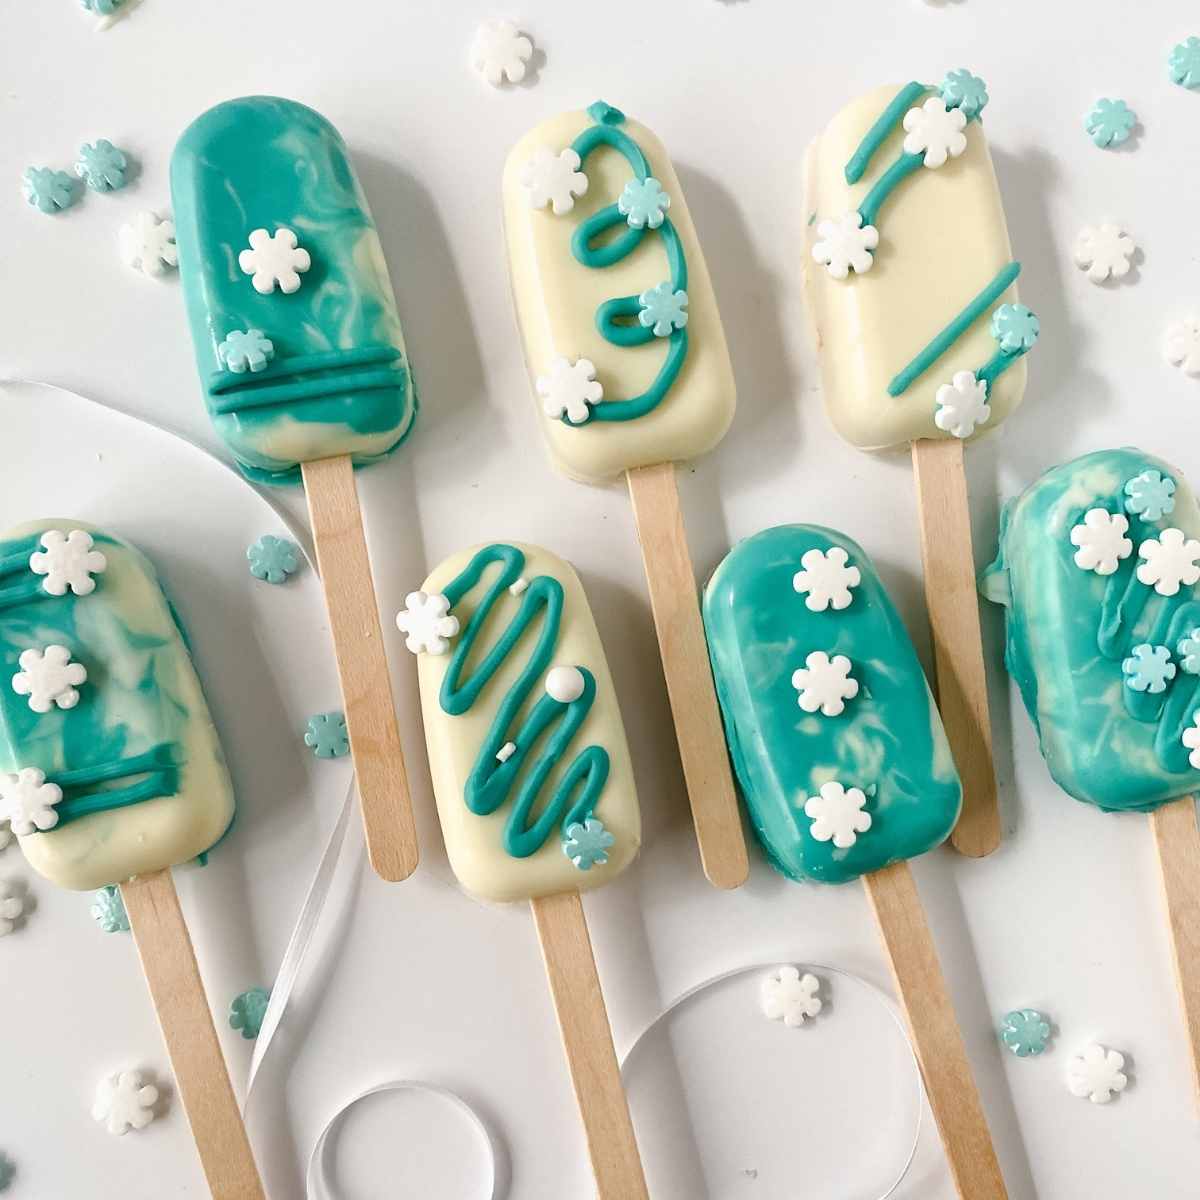 top view of cakesicles decorated in a  winter wonderland theme.